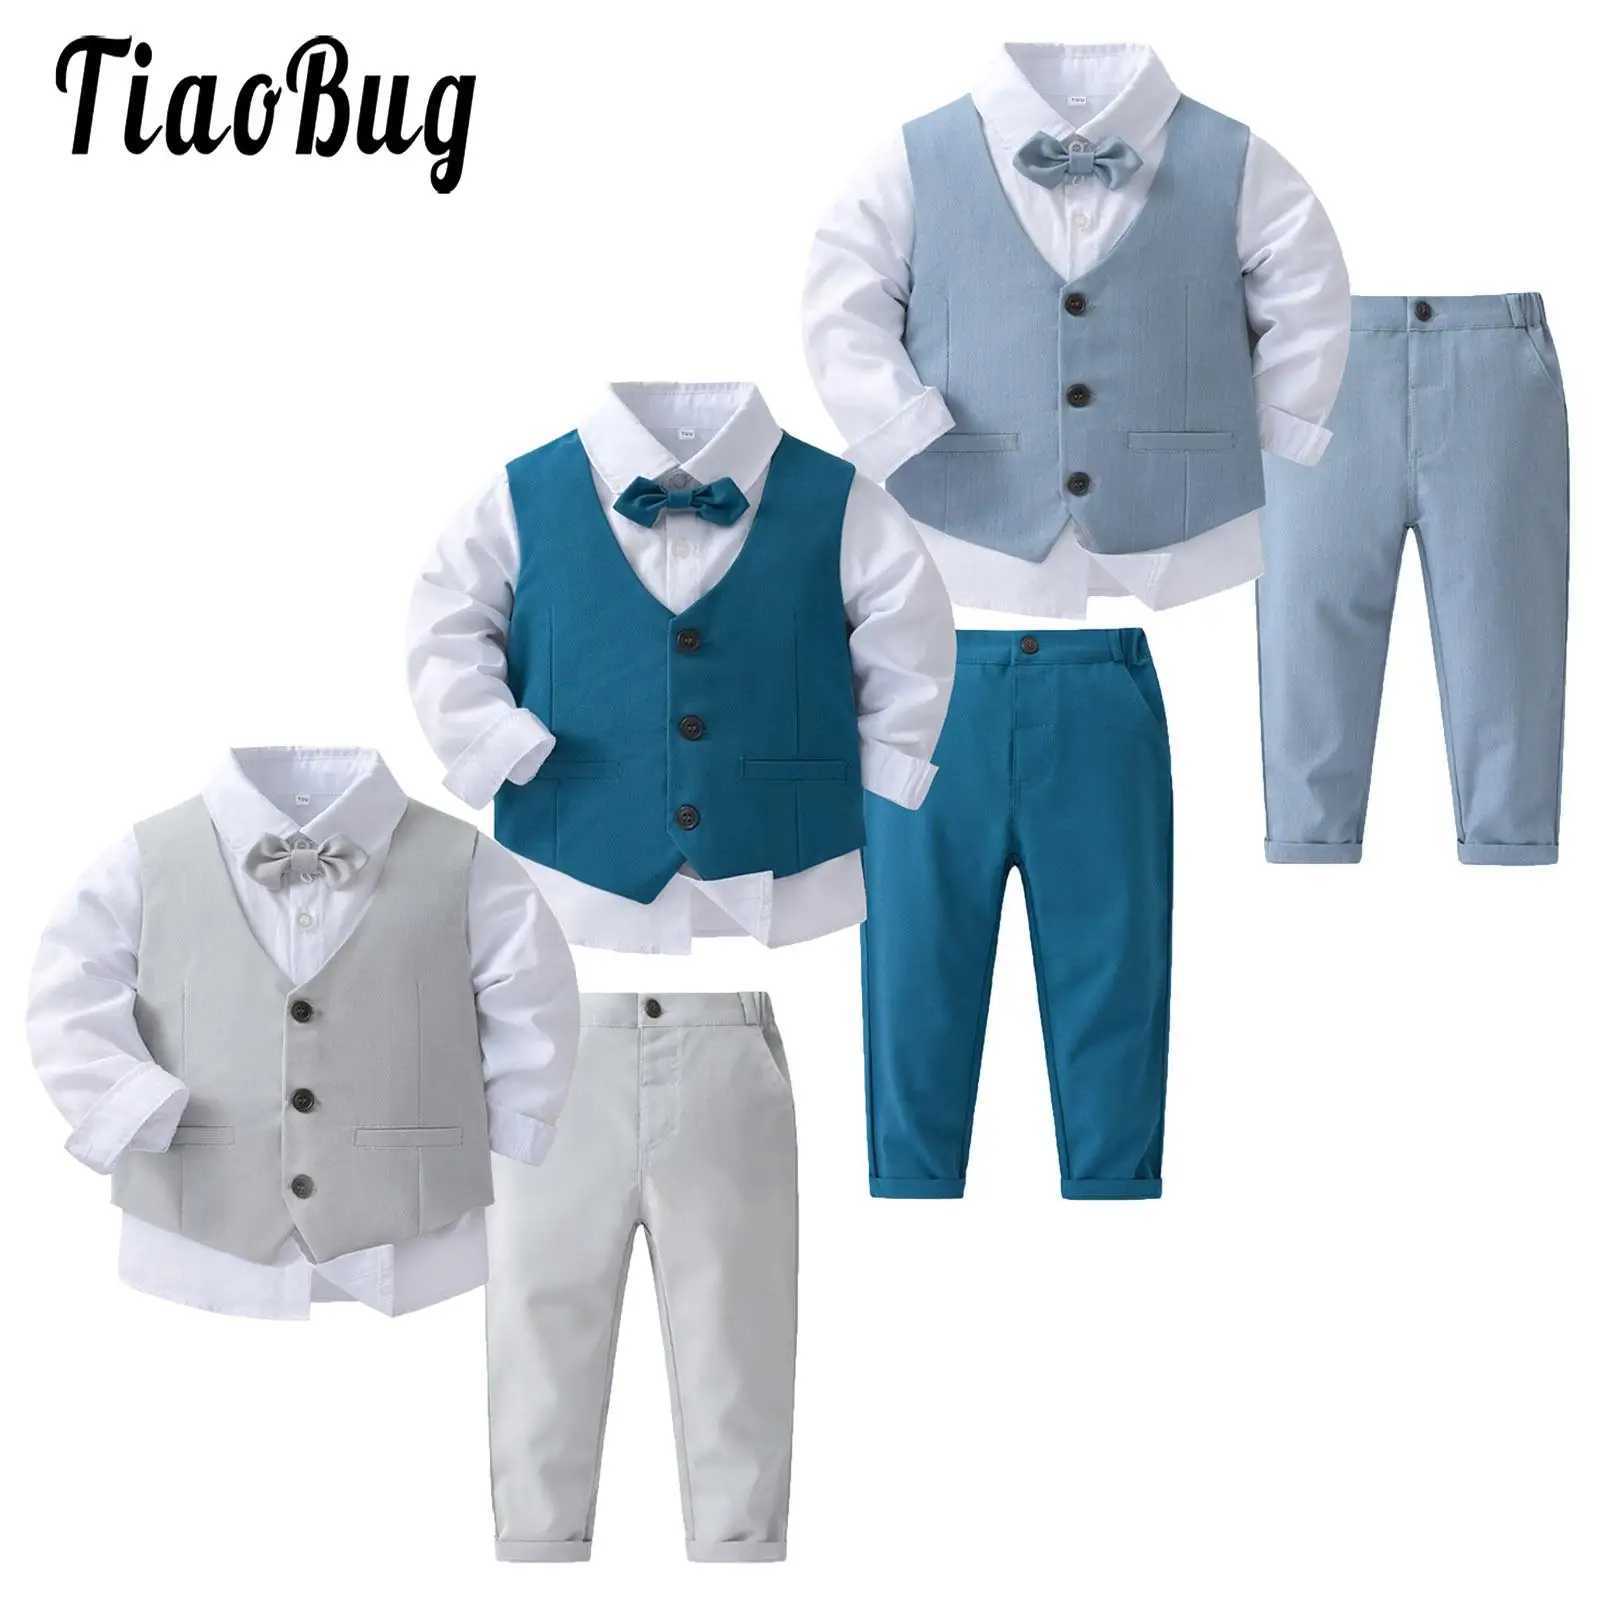 Clothing Sets Mens clothing mens evening dress bow tie shirt vest pants 4 pieces of fashionable baby clothing mens clothingL240513